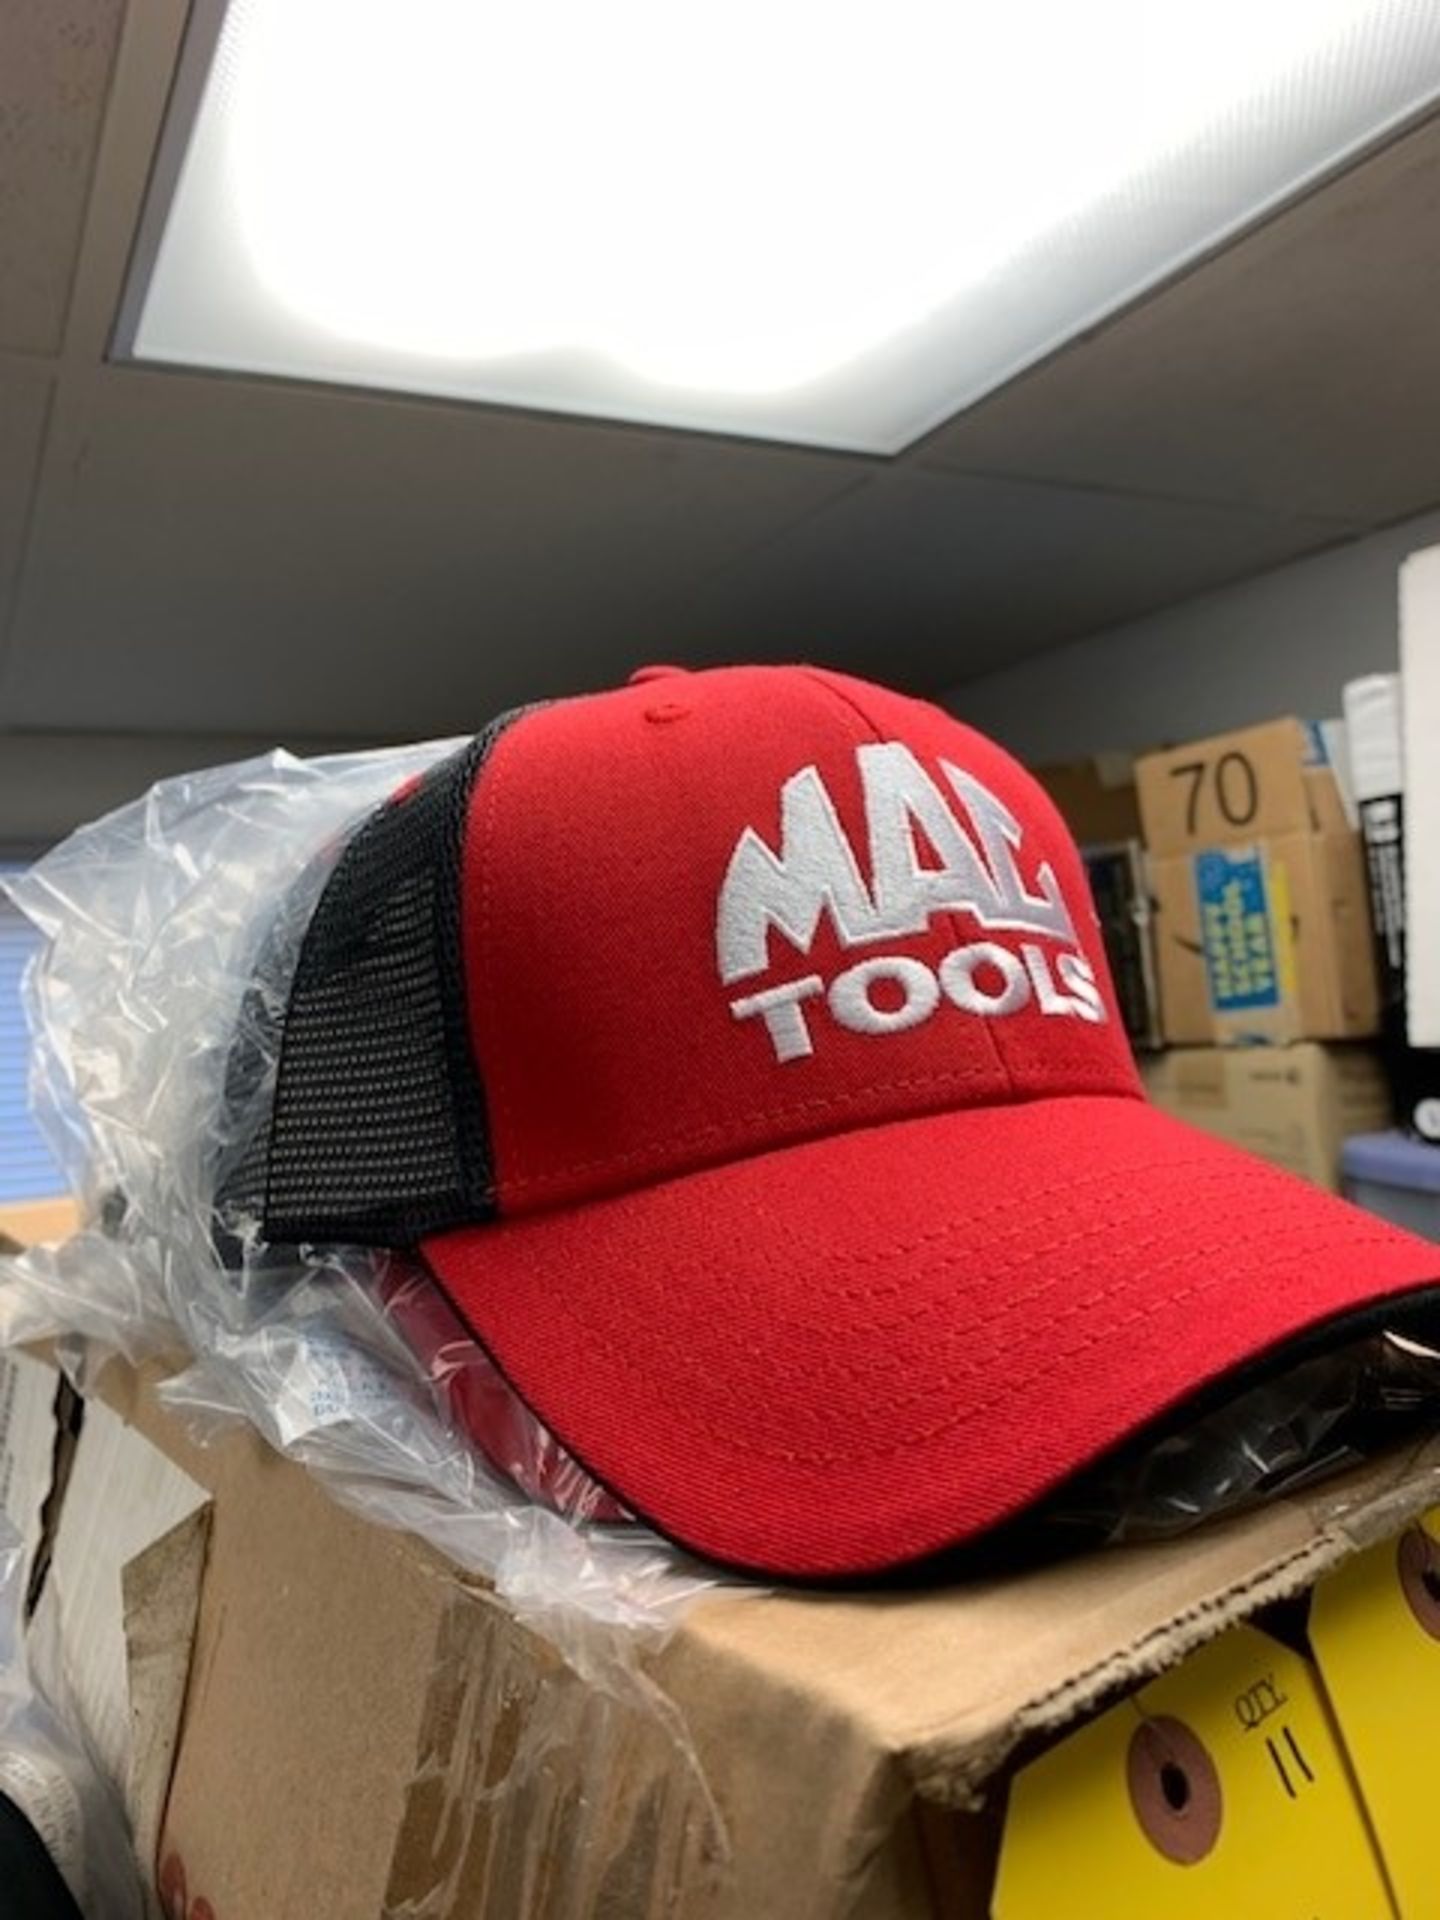 (11) MAC TOOL BLACK AND RED MESH BASEBALL-STYLE CAPS - Image 2 of 3